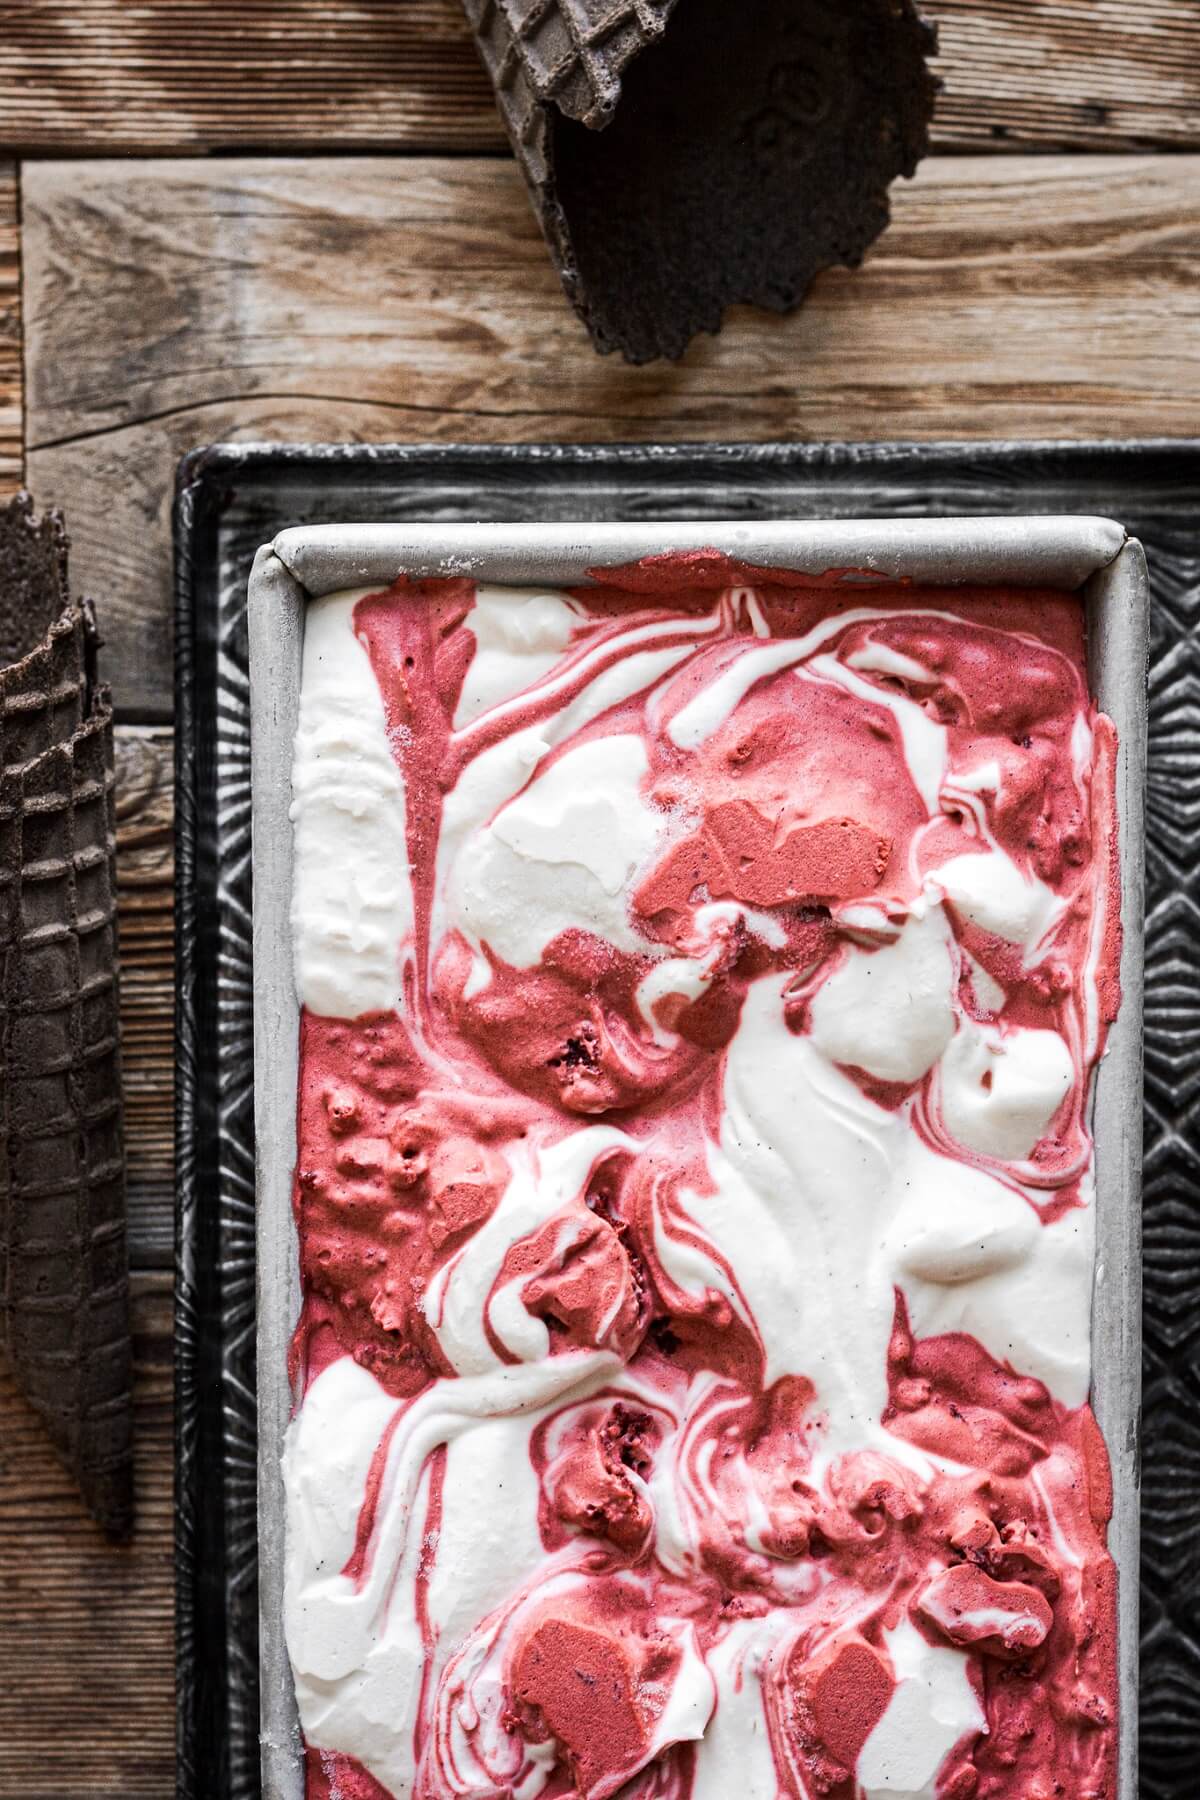 Red velvet swirl ice cream in a metal loaf pan.